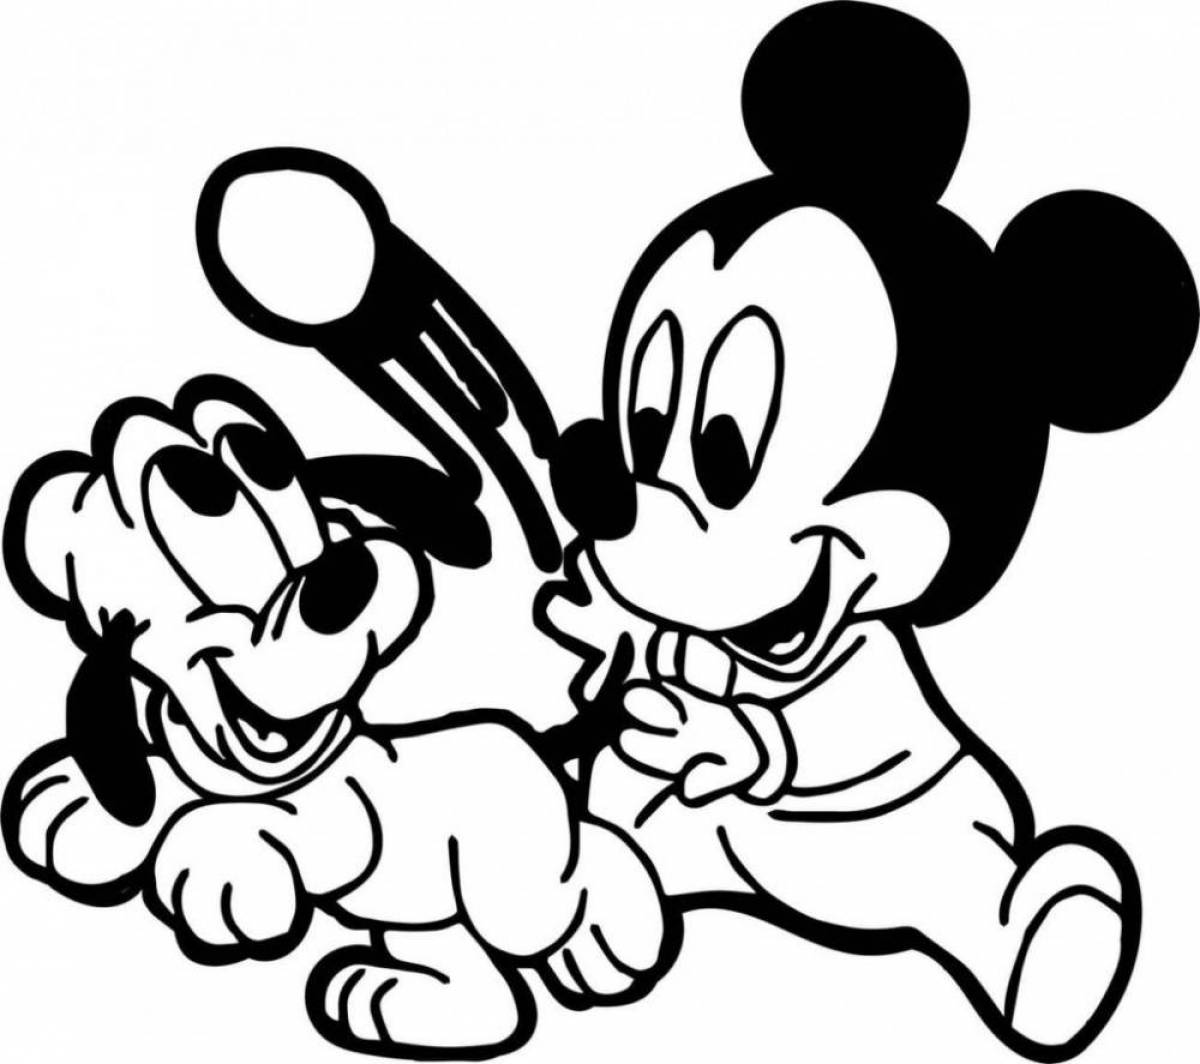 Colouring friendly mickey mouse